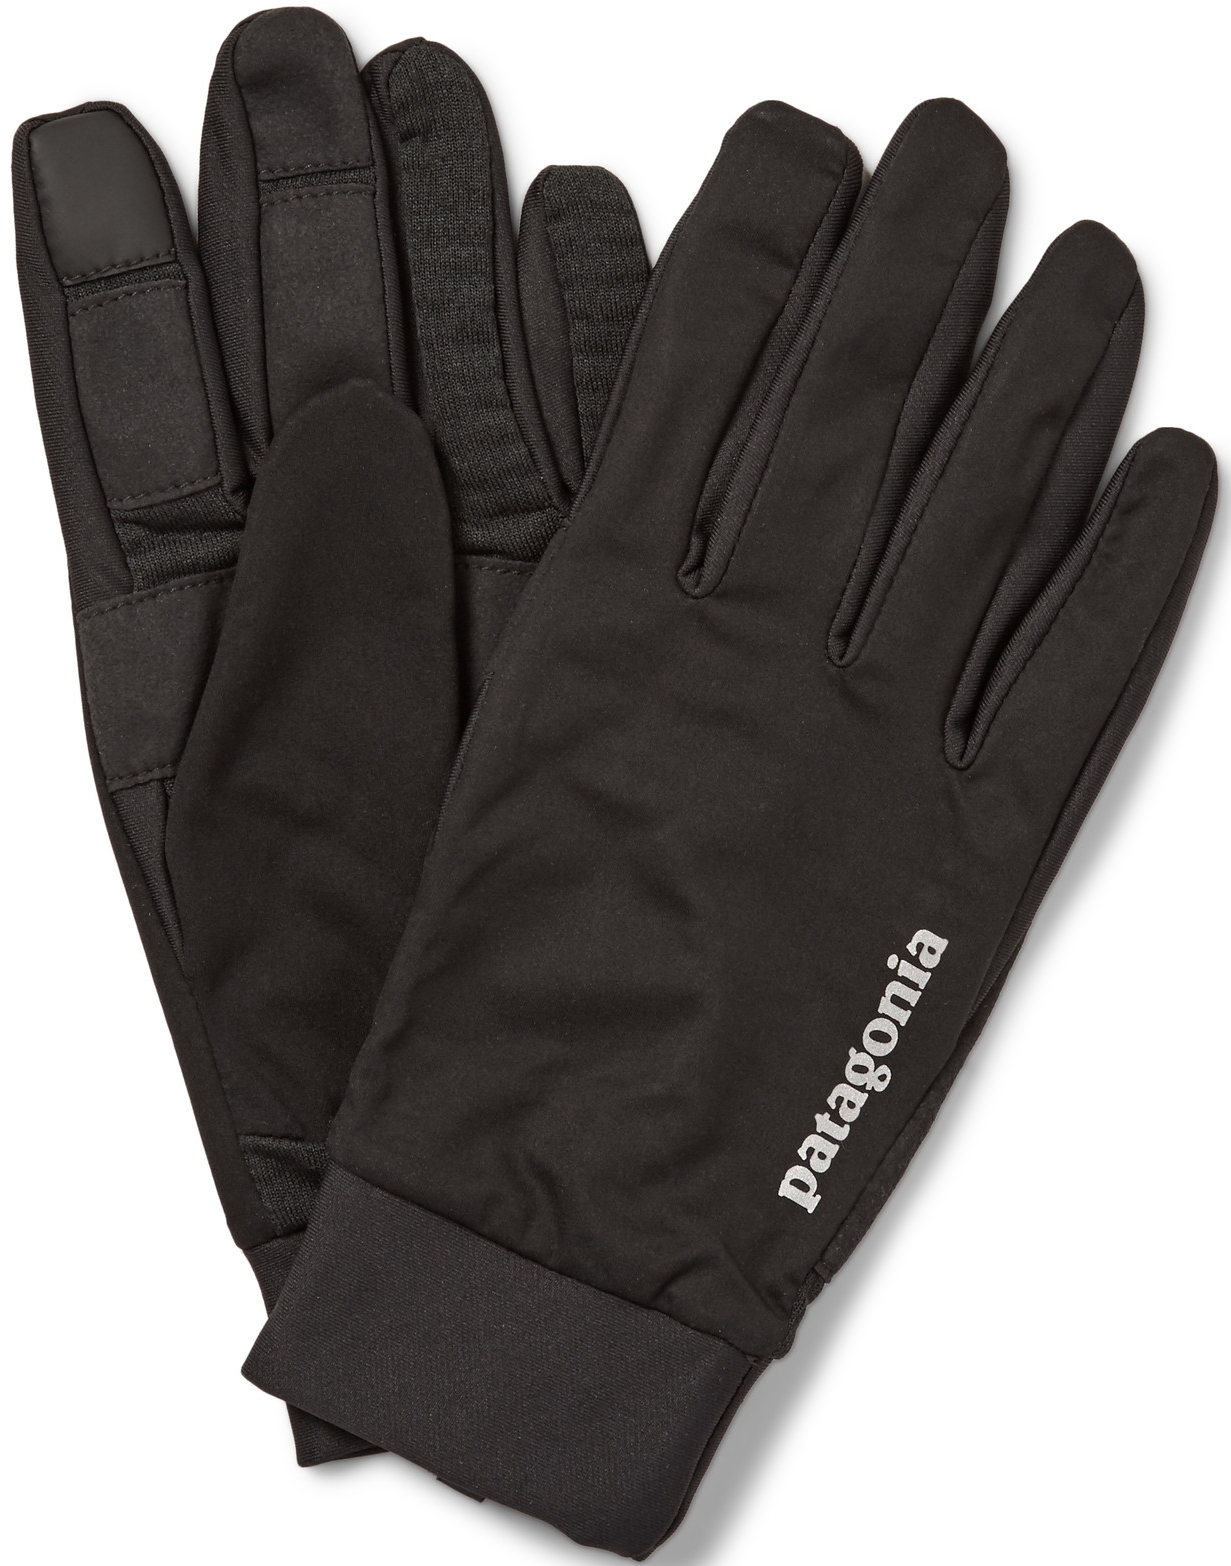 Patagonia Wind Shield Stretch-Jersey Gloves at Mr. Porter, $50